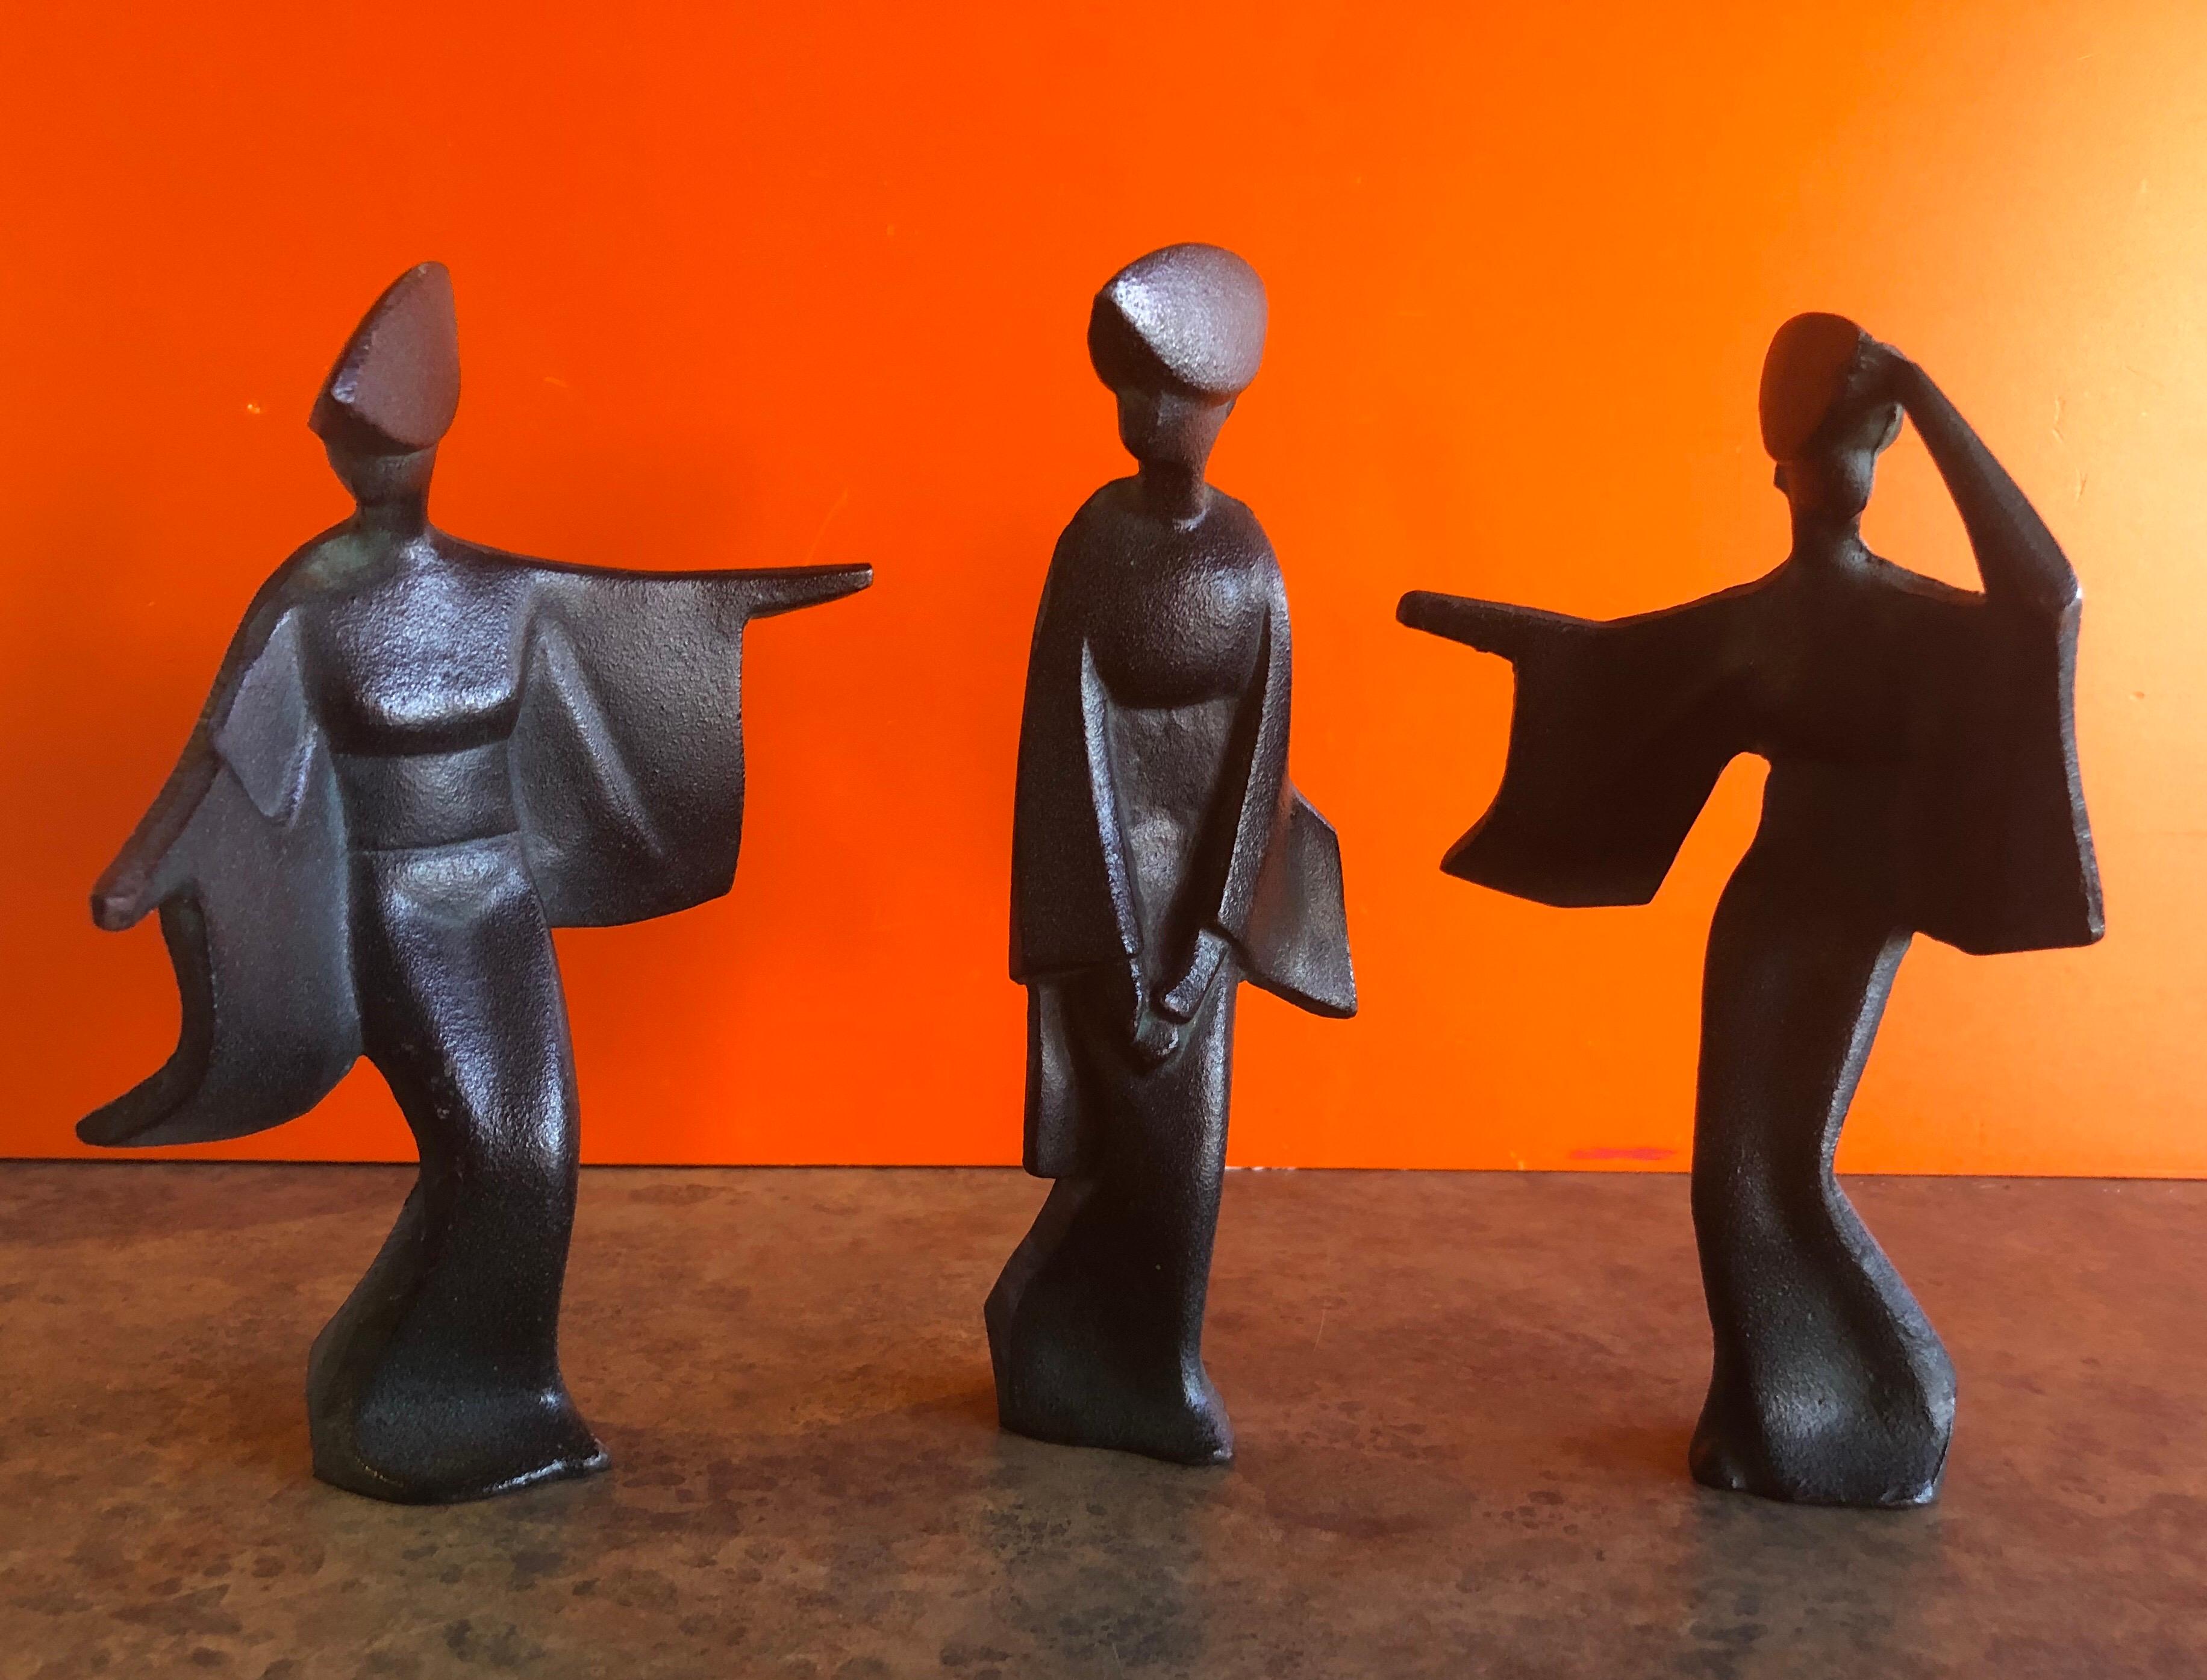 A very cool set of three Japanese geisha figurines, circa 1960s. The pieces are cast iron with verde gris finish and are quite heavy; they would make a great Mid-Century Modern accent in any space! #1128.